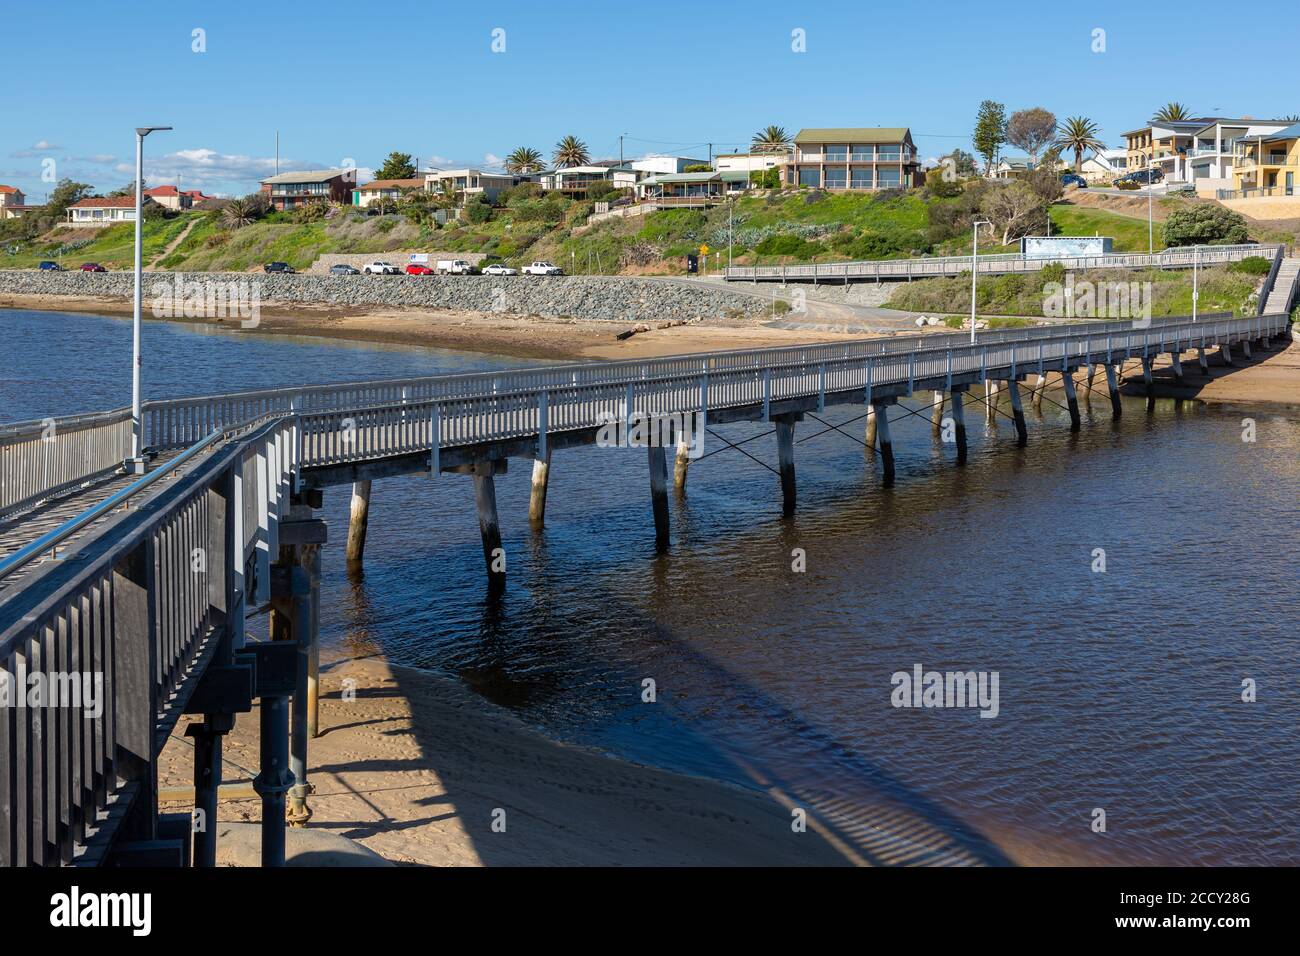 The footbridge crossing over the Onkaparinga River mouth at Port Noarlunga South Australia on August 25th 2020 Stock Photo